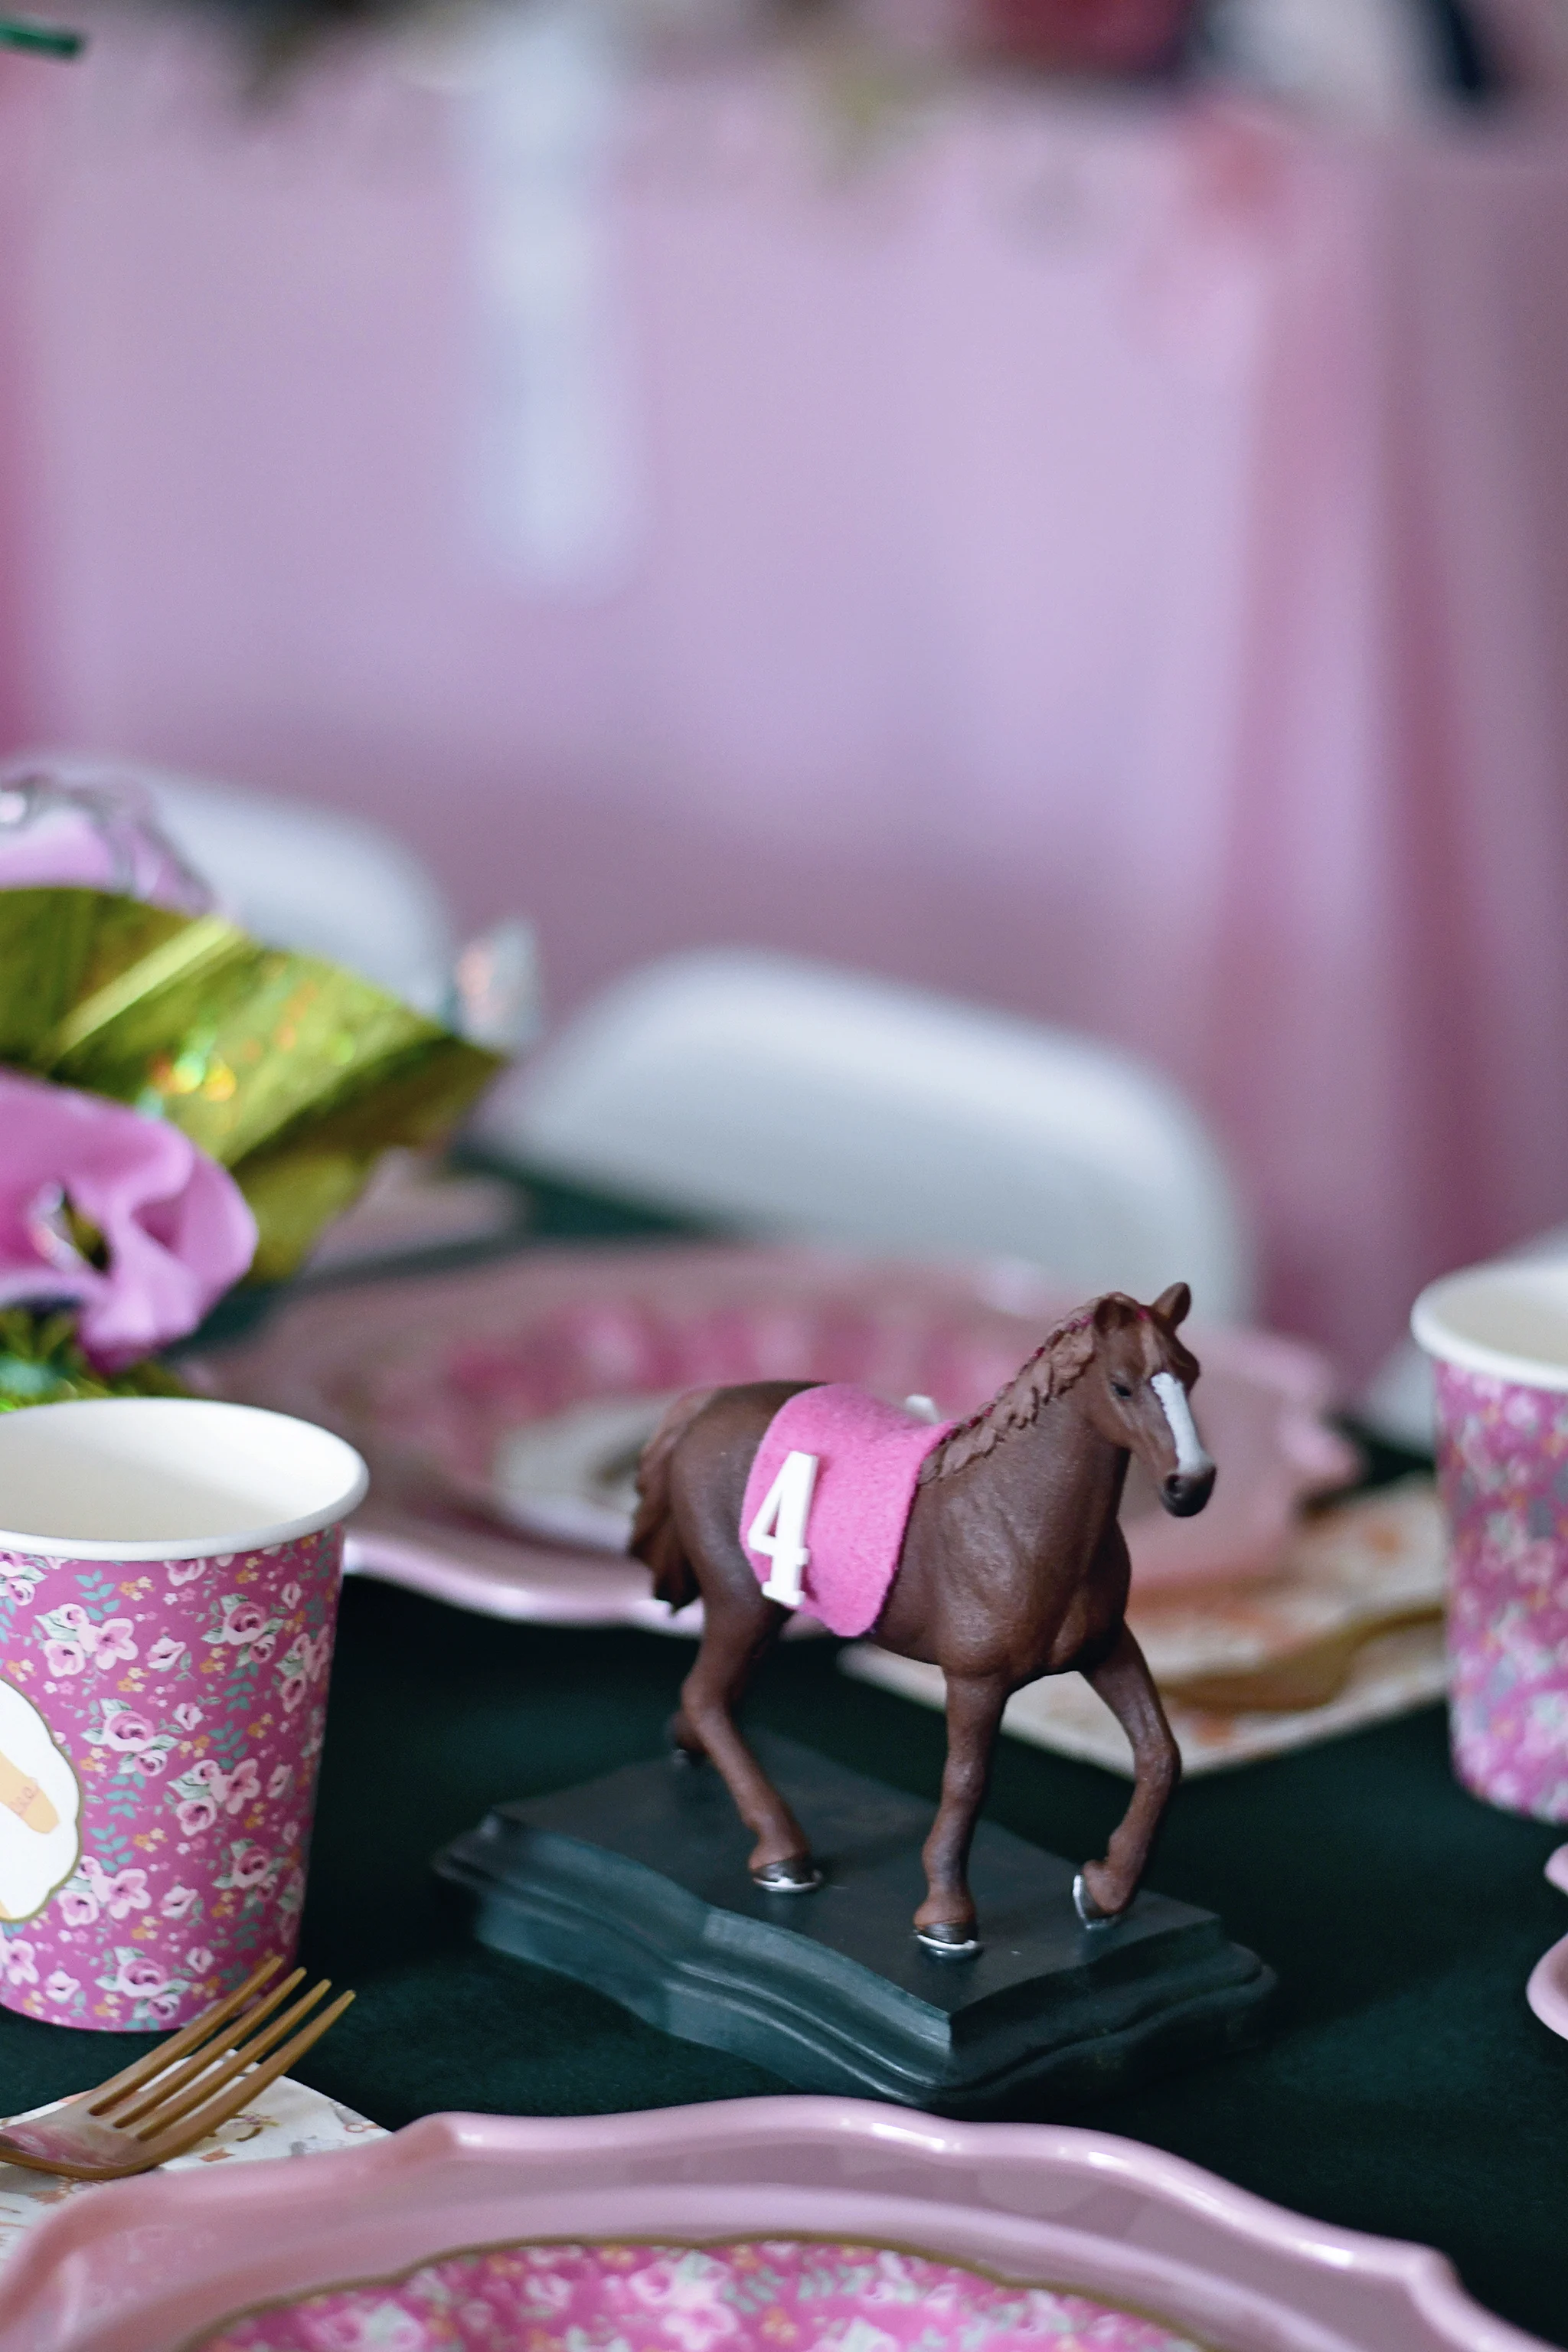 Handmade horse statues served as table centerpieces